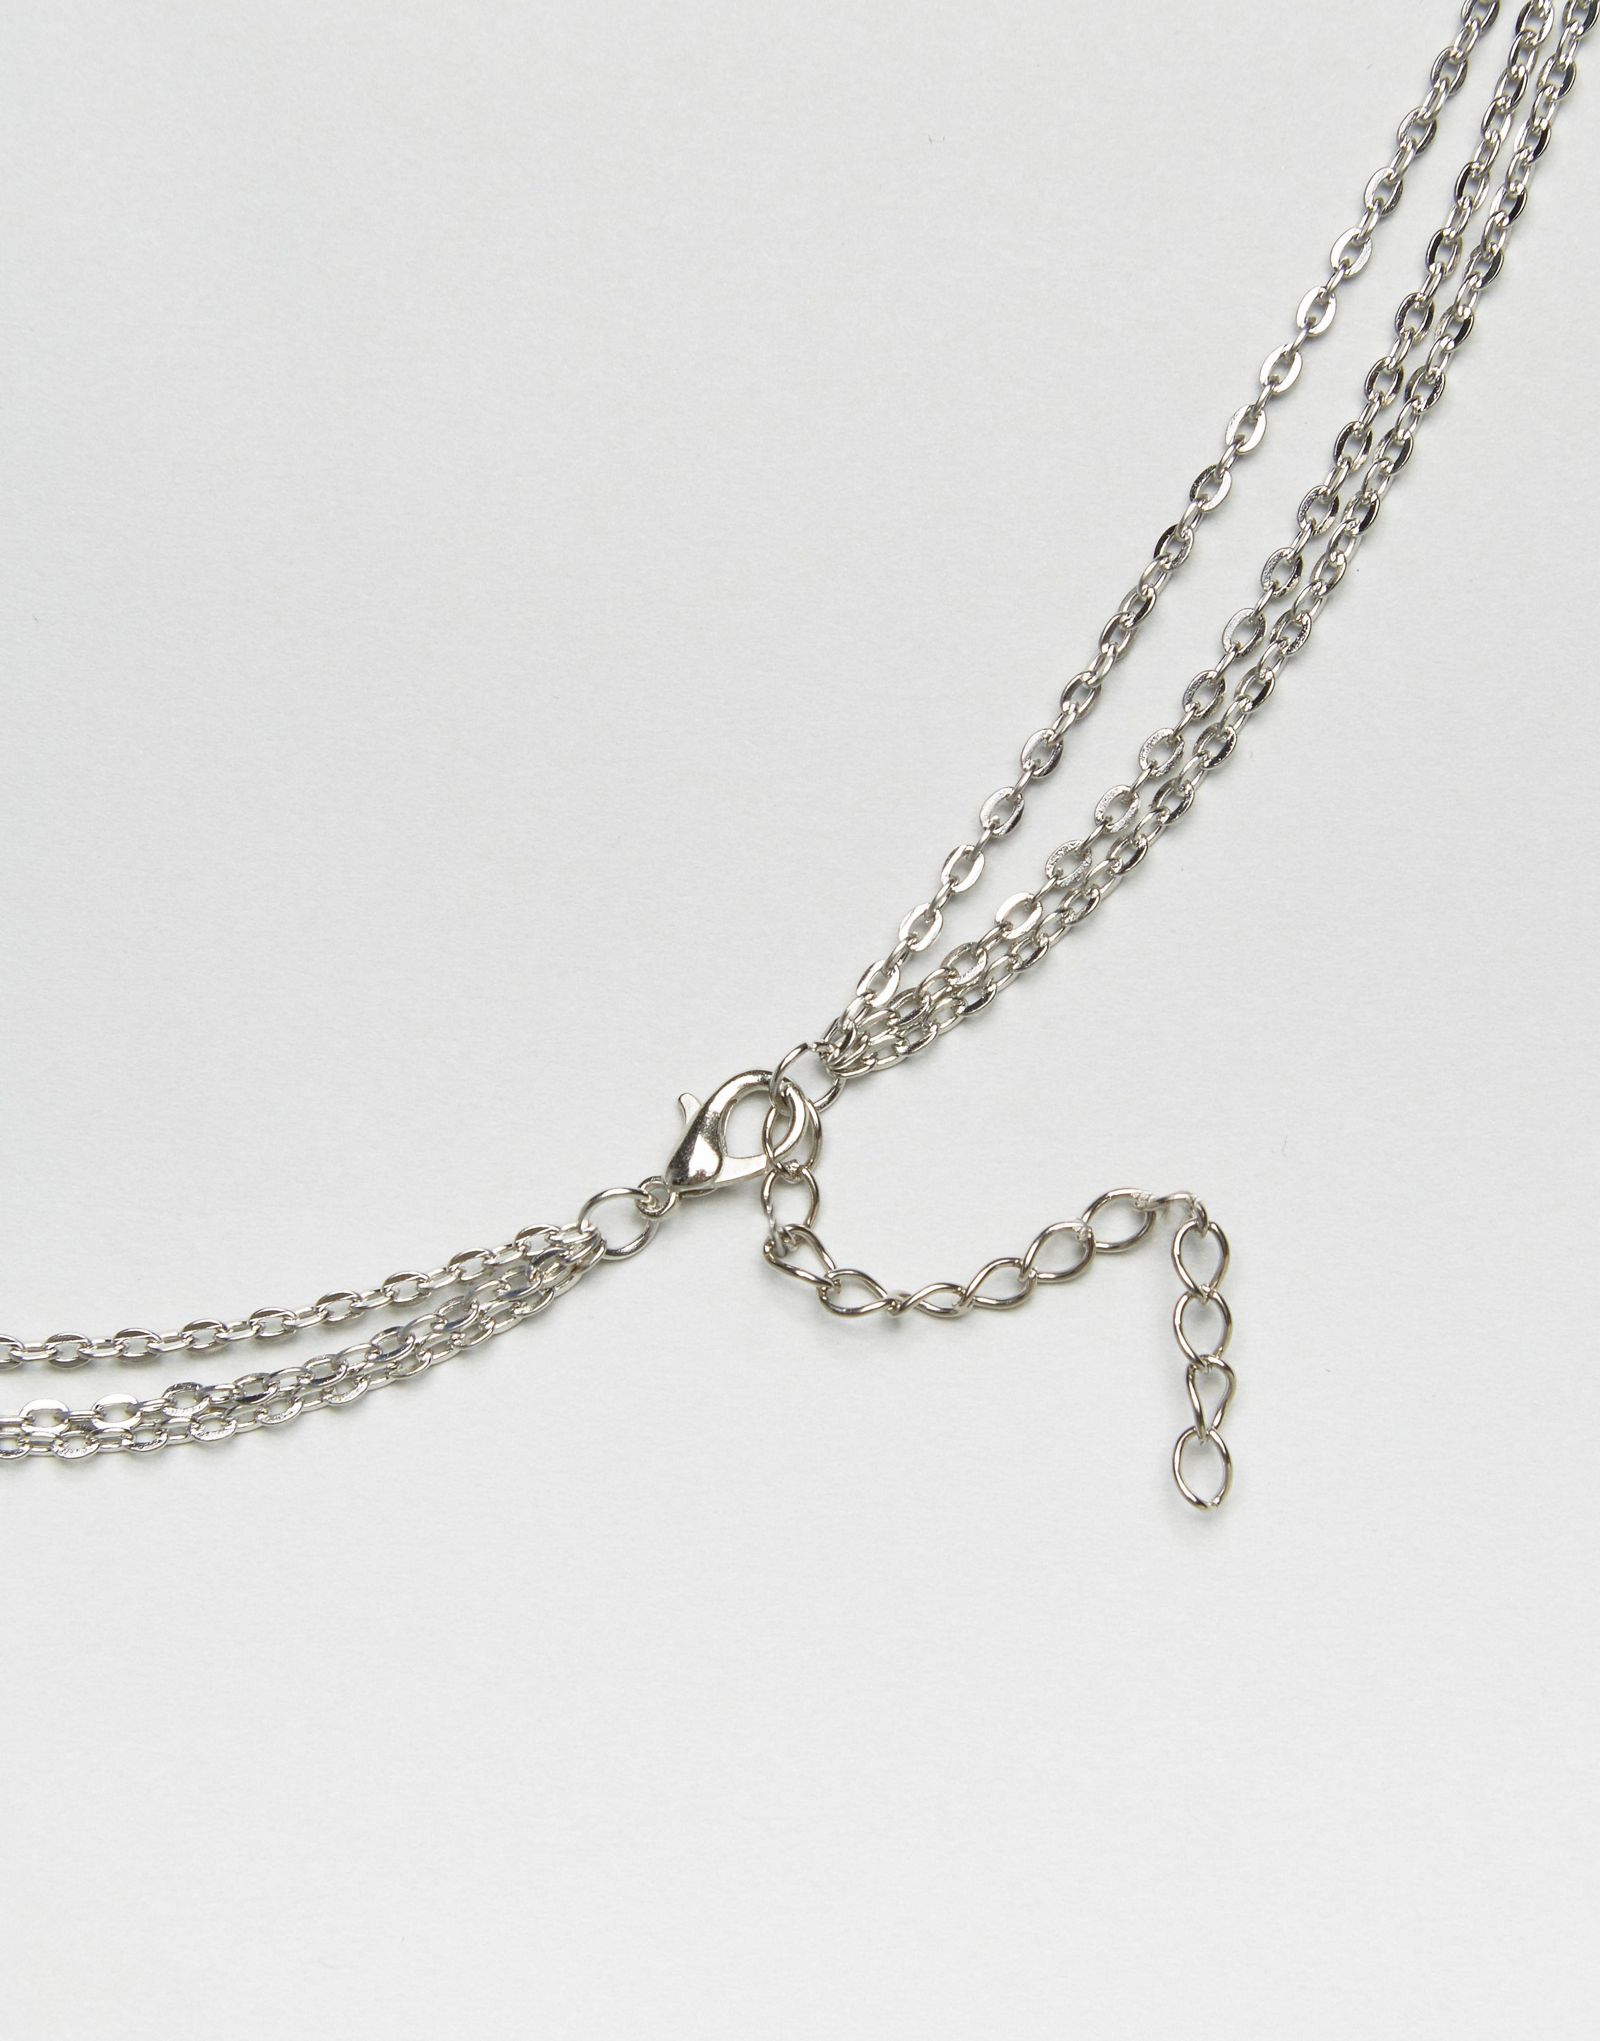 Reclaimed Vintage Multirow Chain Necklace